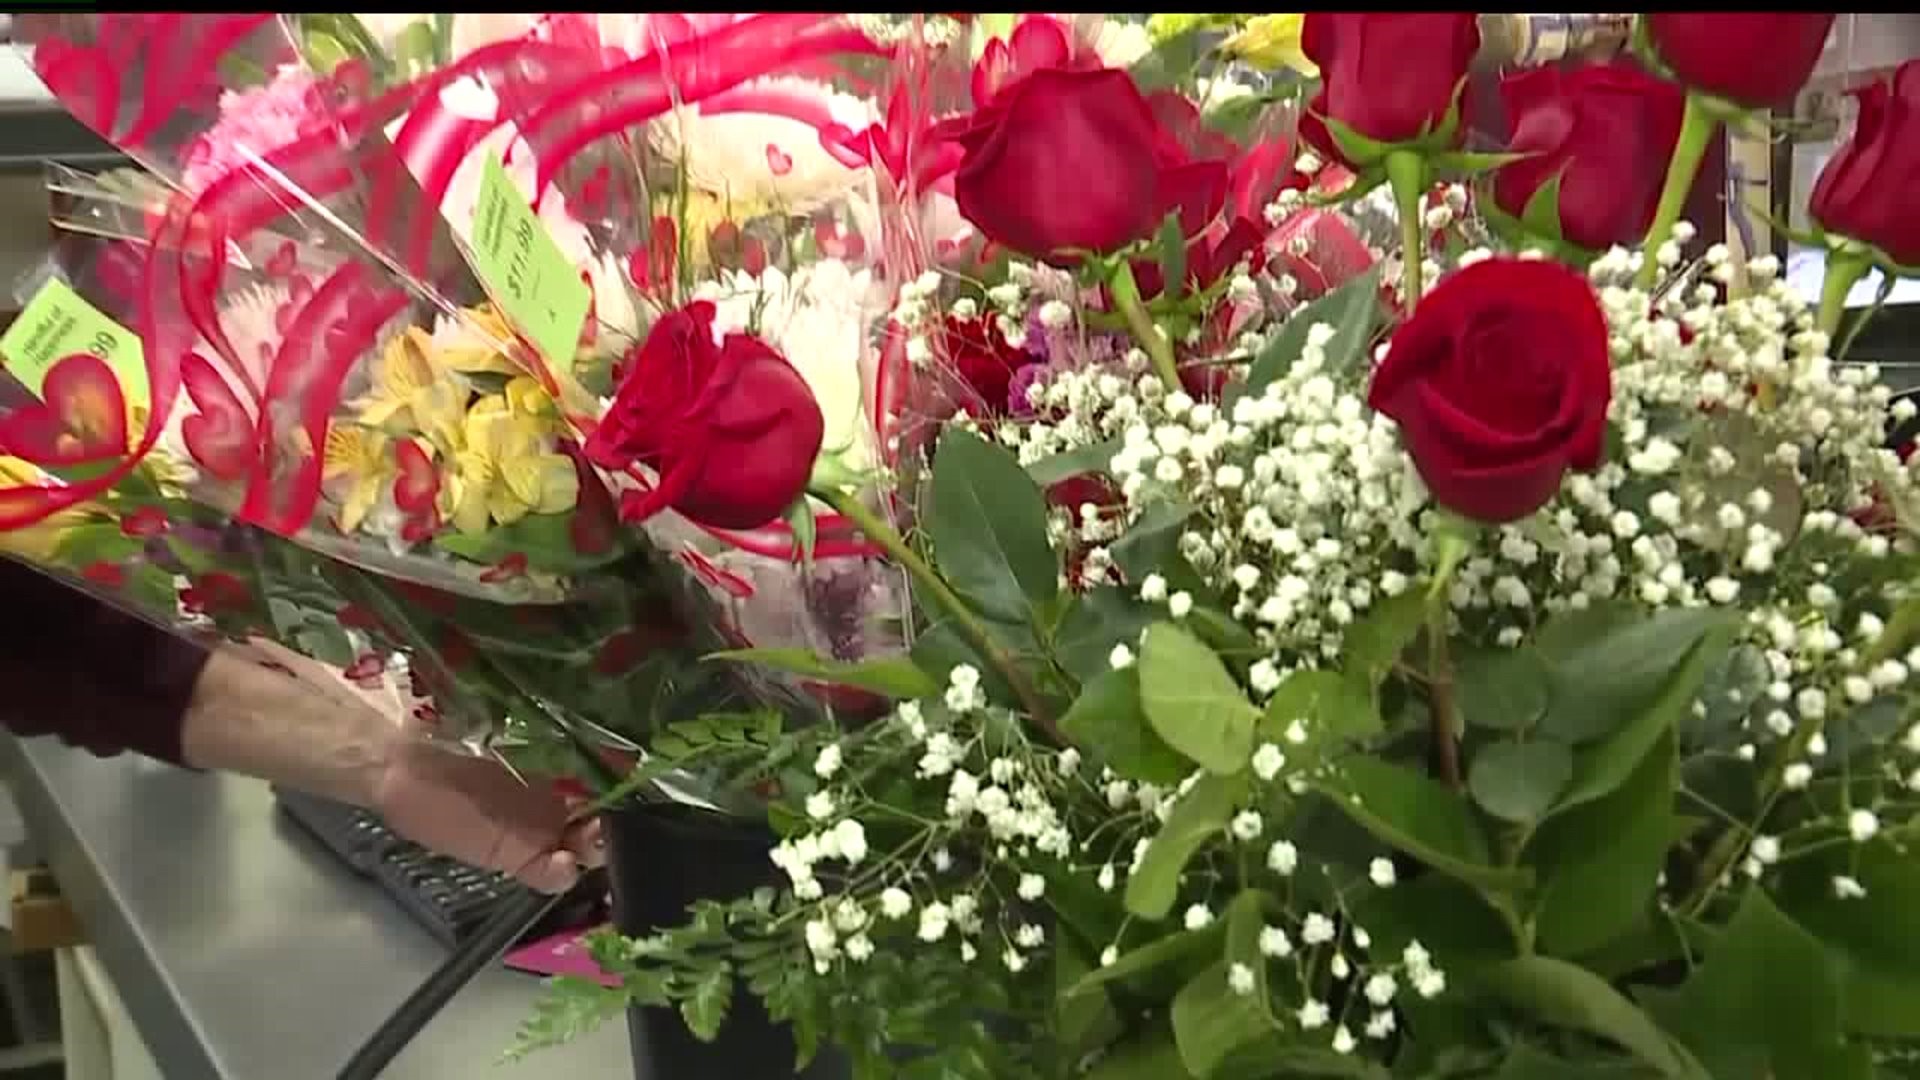 Florists tell FOX43 the pandemic has brought a boost in business as people now have a greater need for flowers.